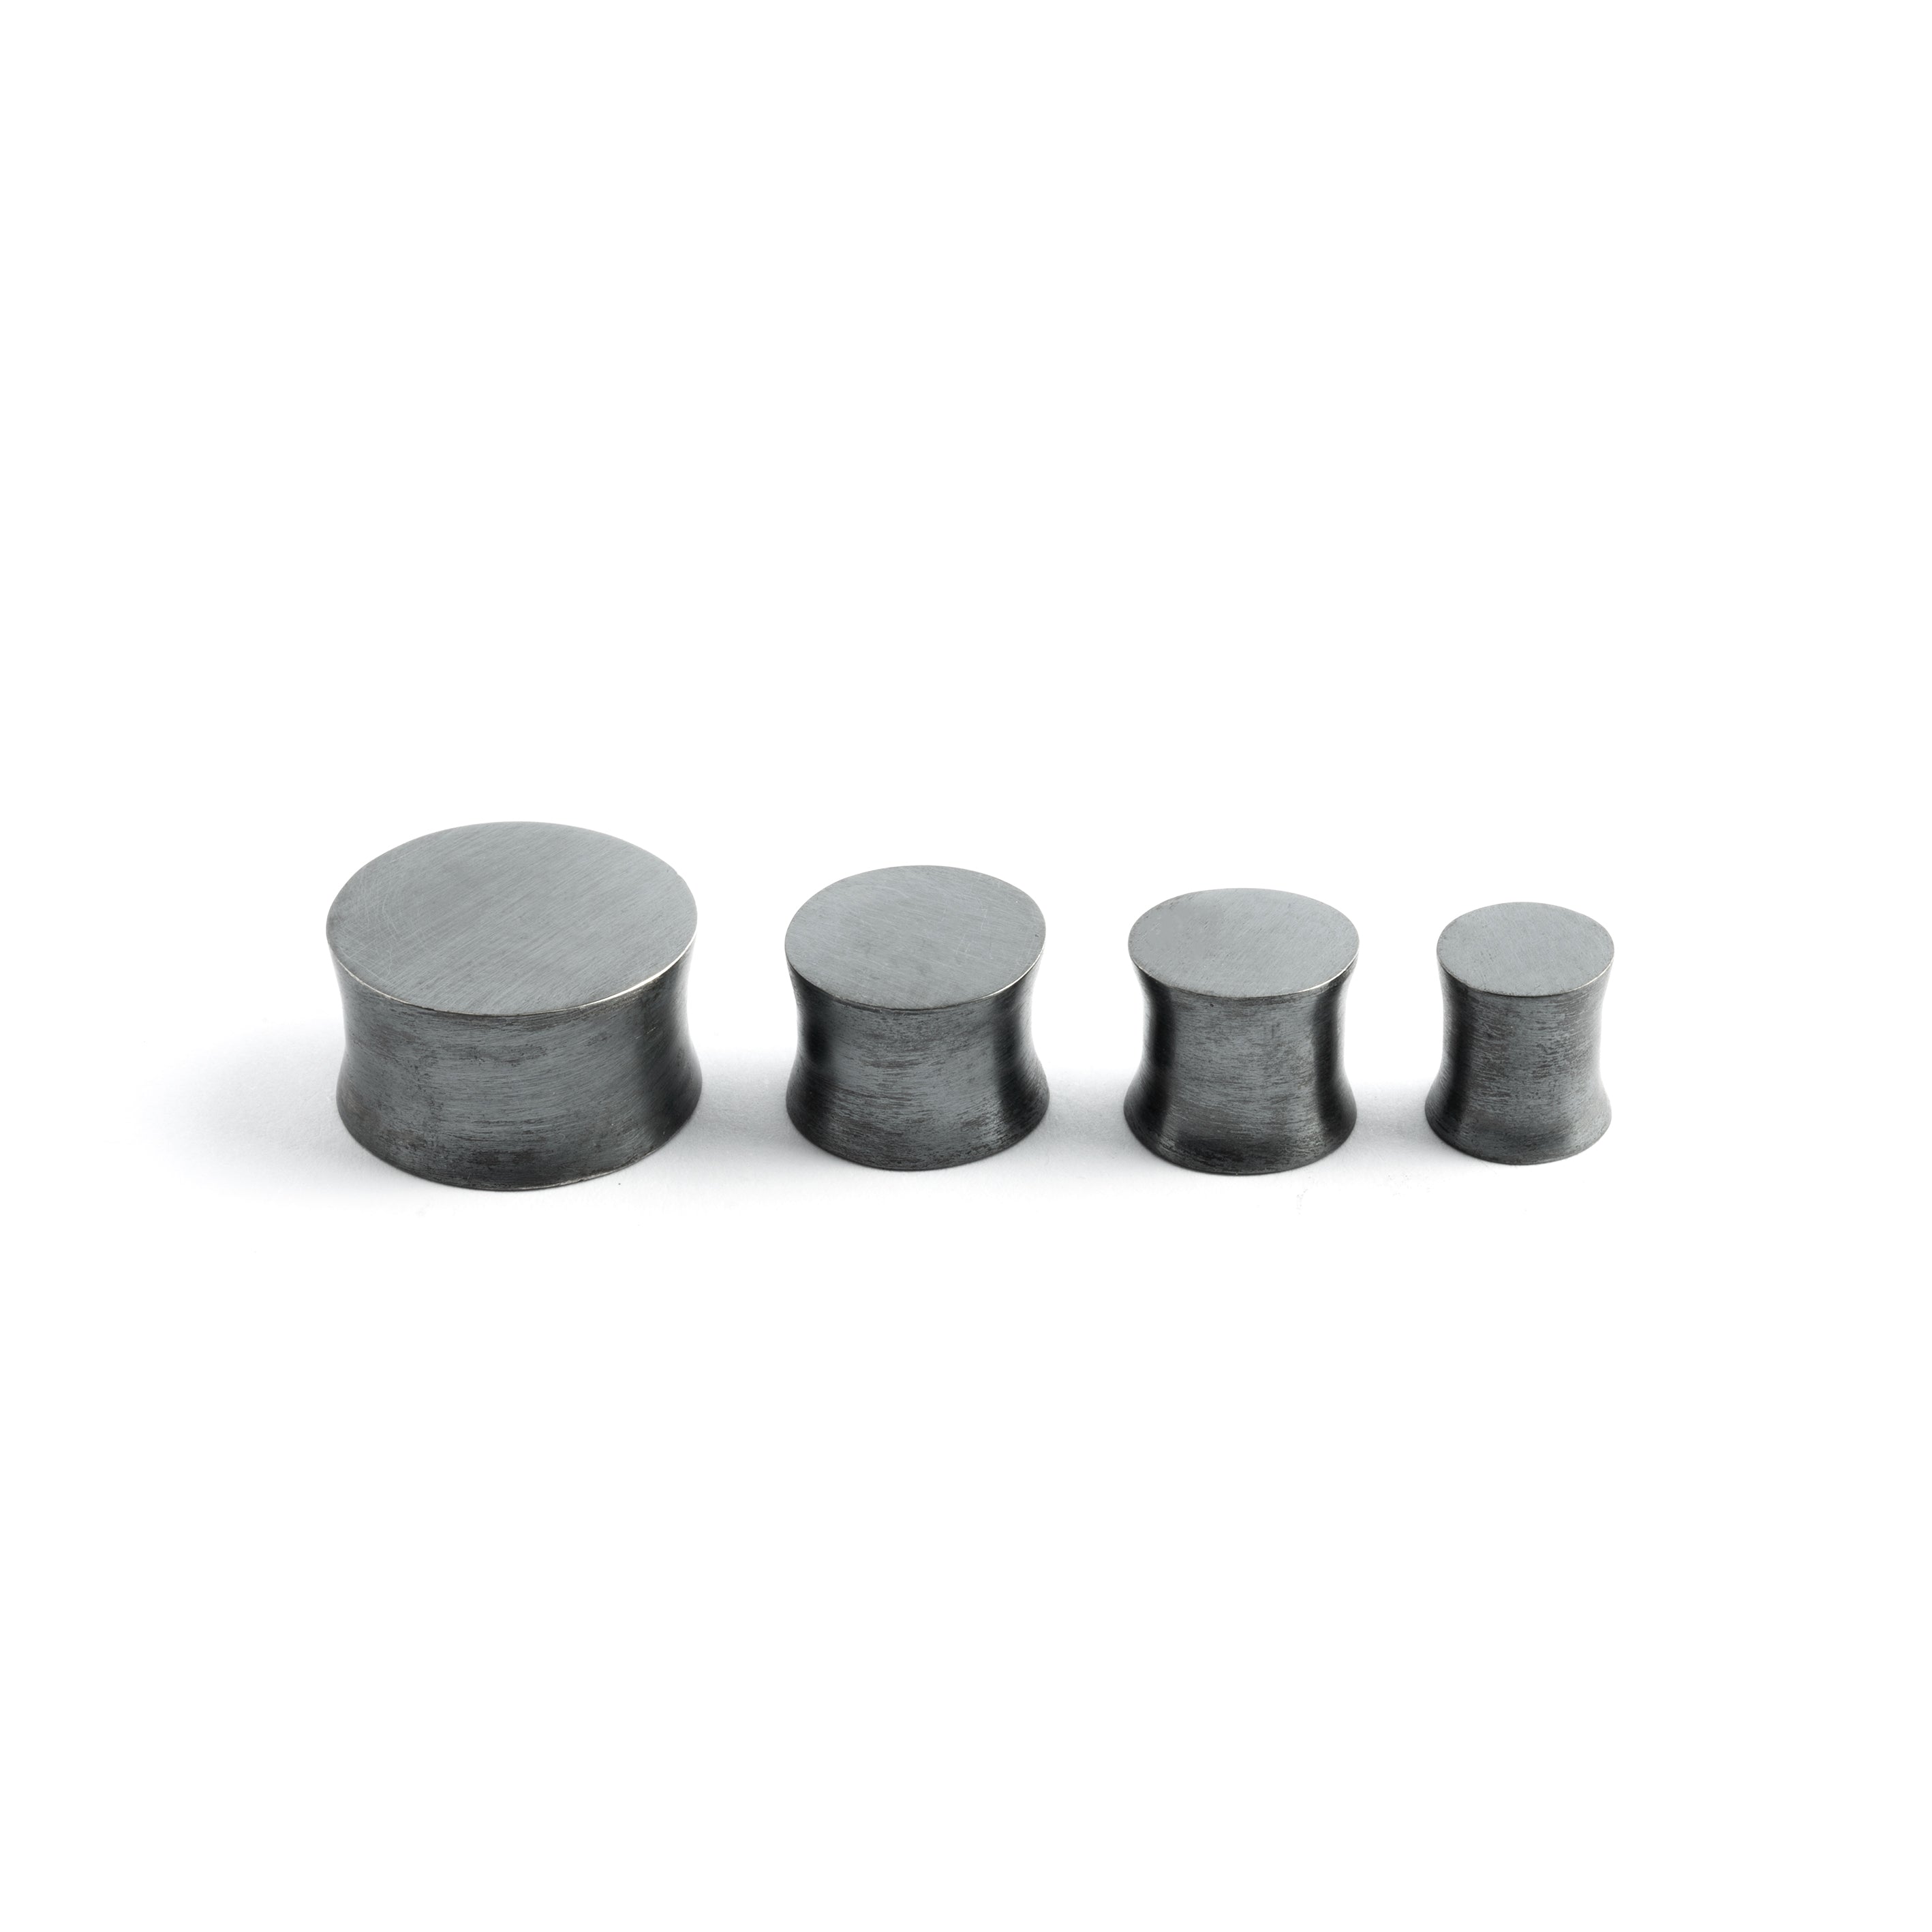 several sizes of double flared black silver ear plugs side view